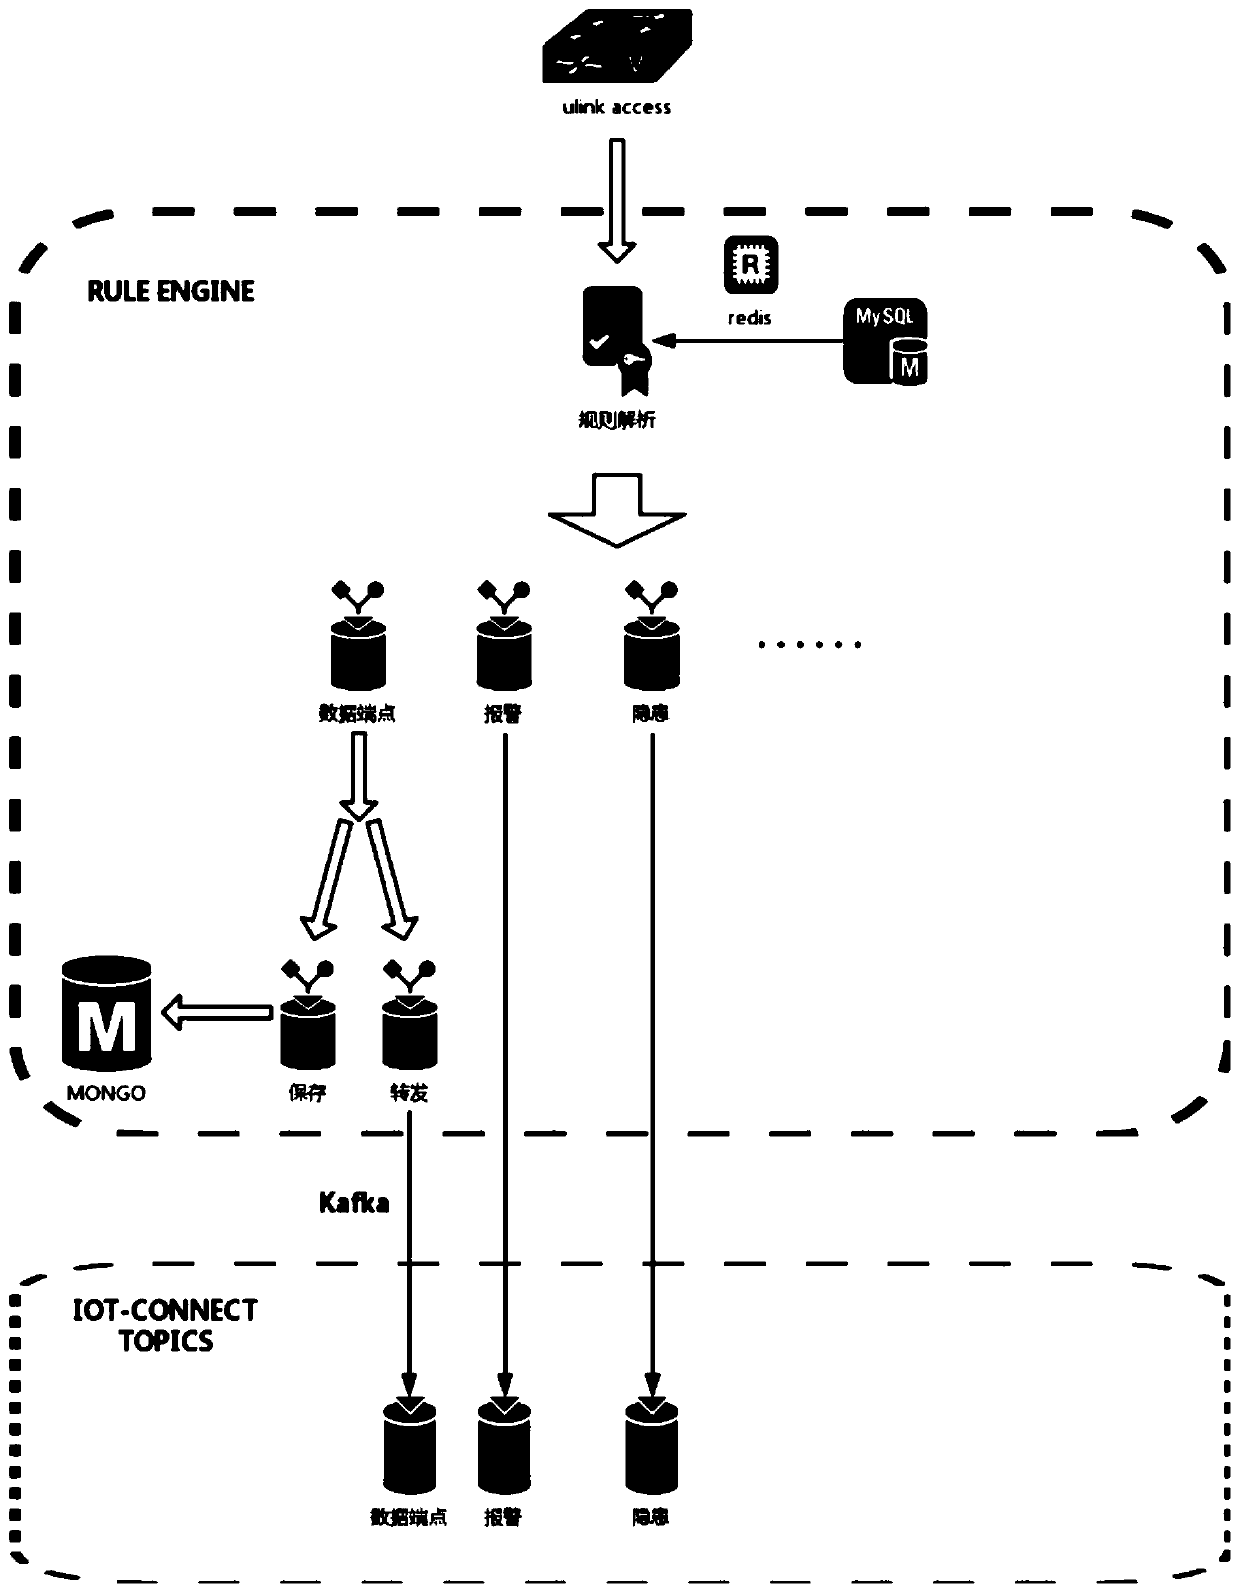 Distributed Internet of Things security access system